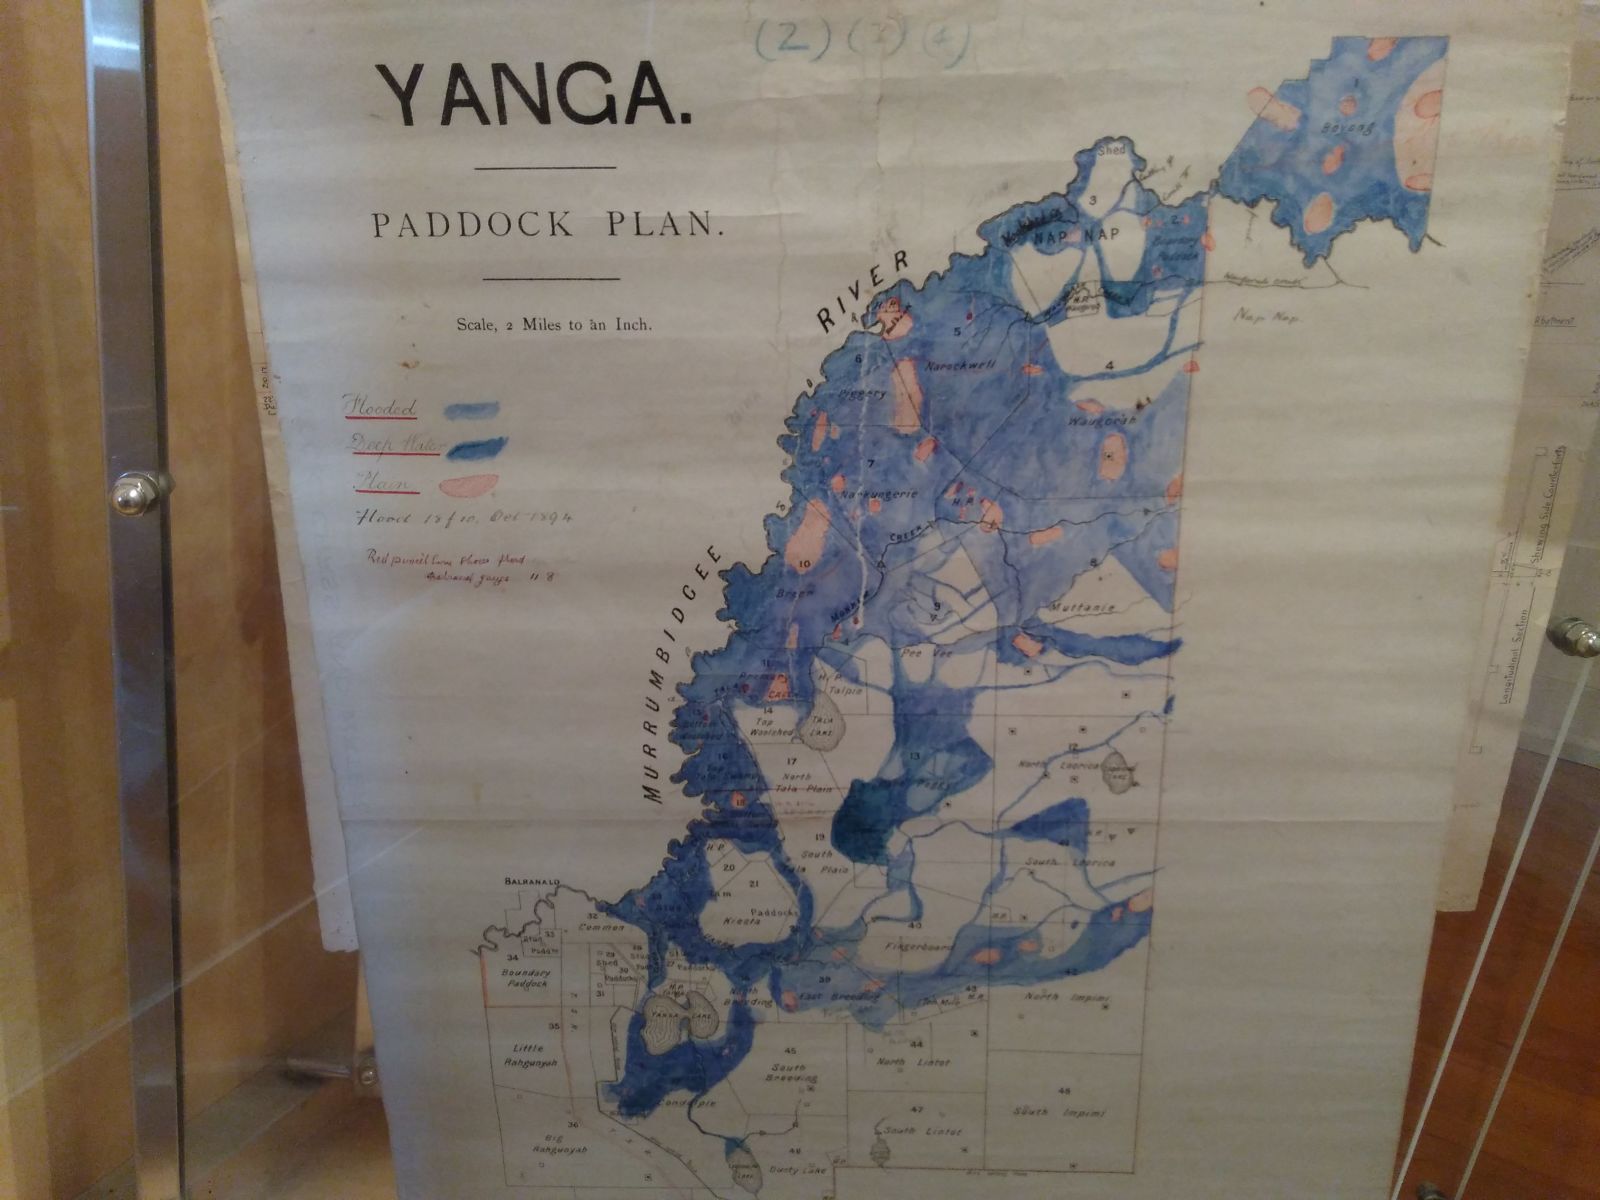 Everything in blue used to get flooded. Yanga Homestead is in the bottom left